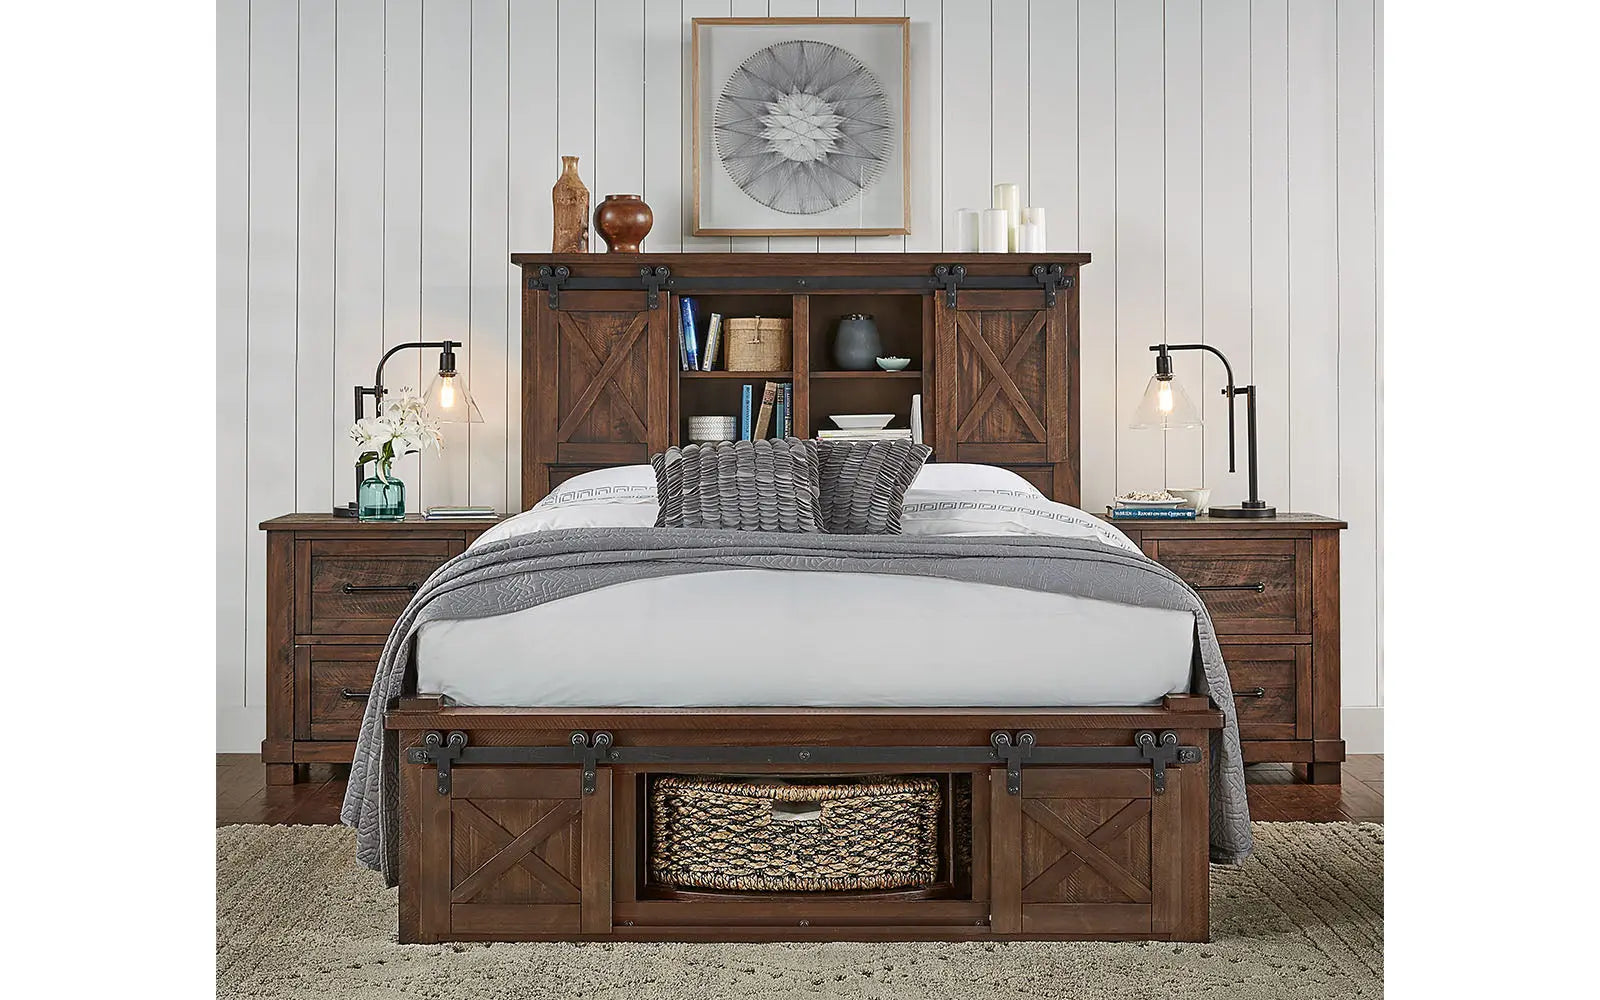 Sun Valley Rustic Timber King Storage Hdbr W/ Rotating Storage A-America